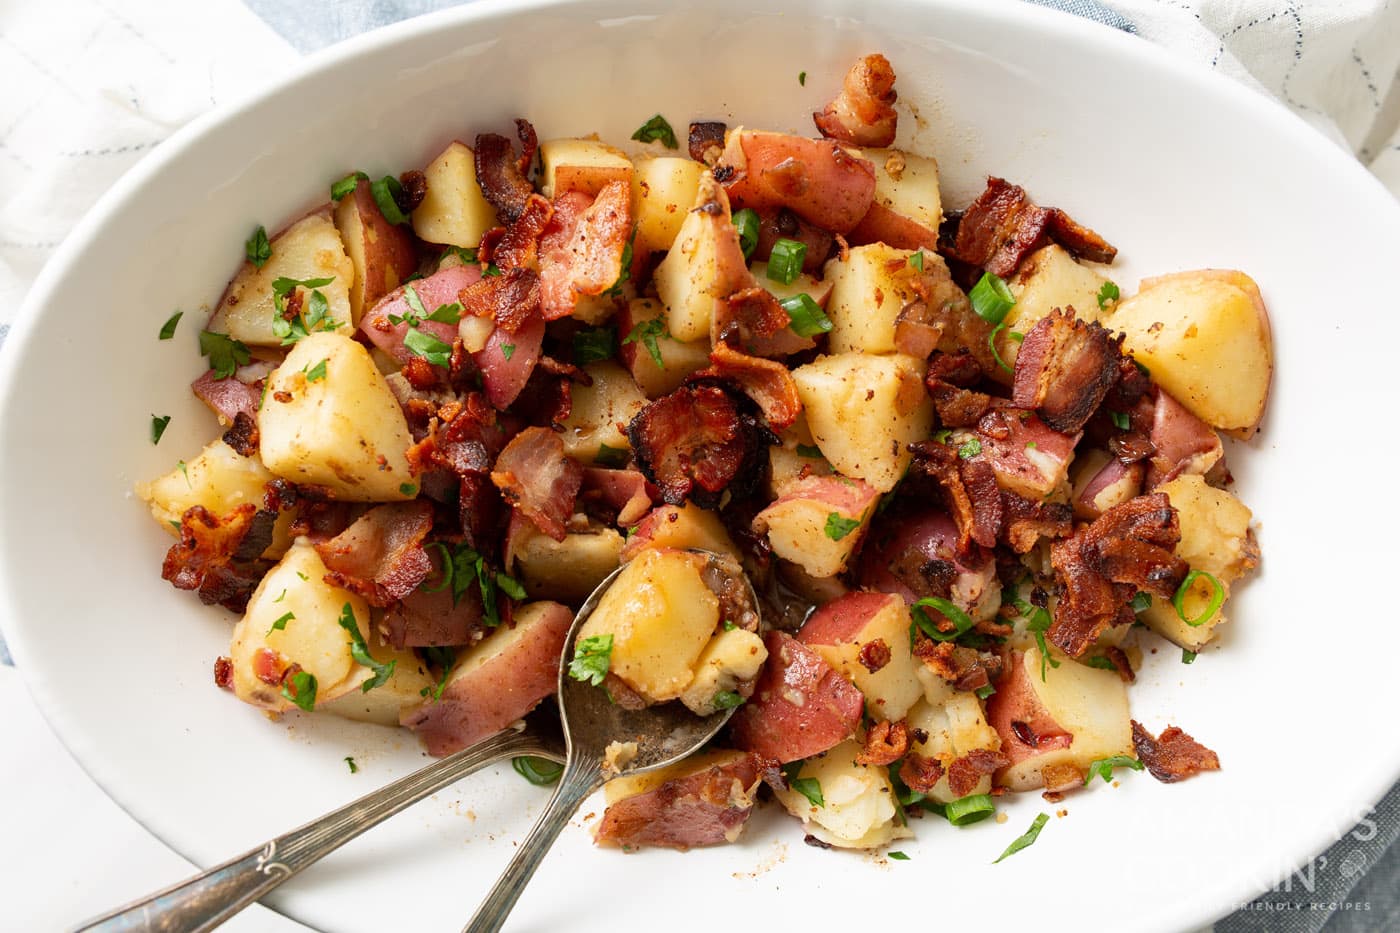 German potato salad is great for backyard parties or as a classic dinner side.